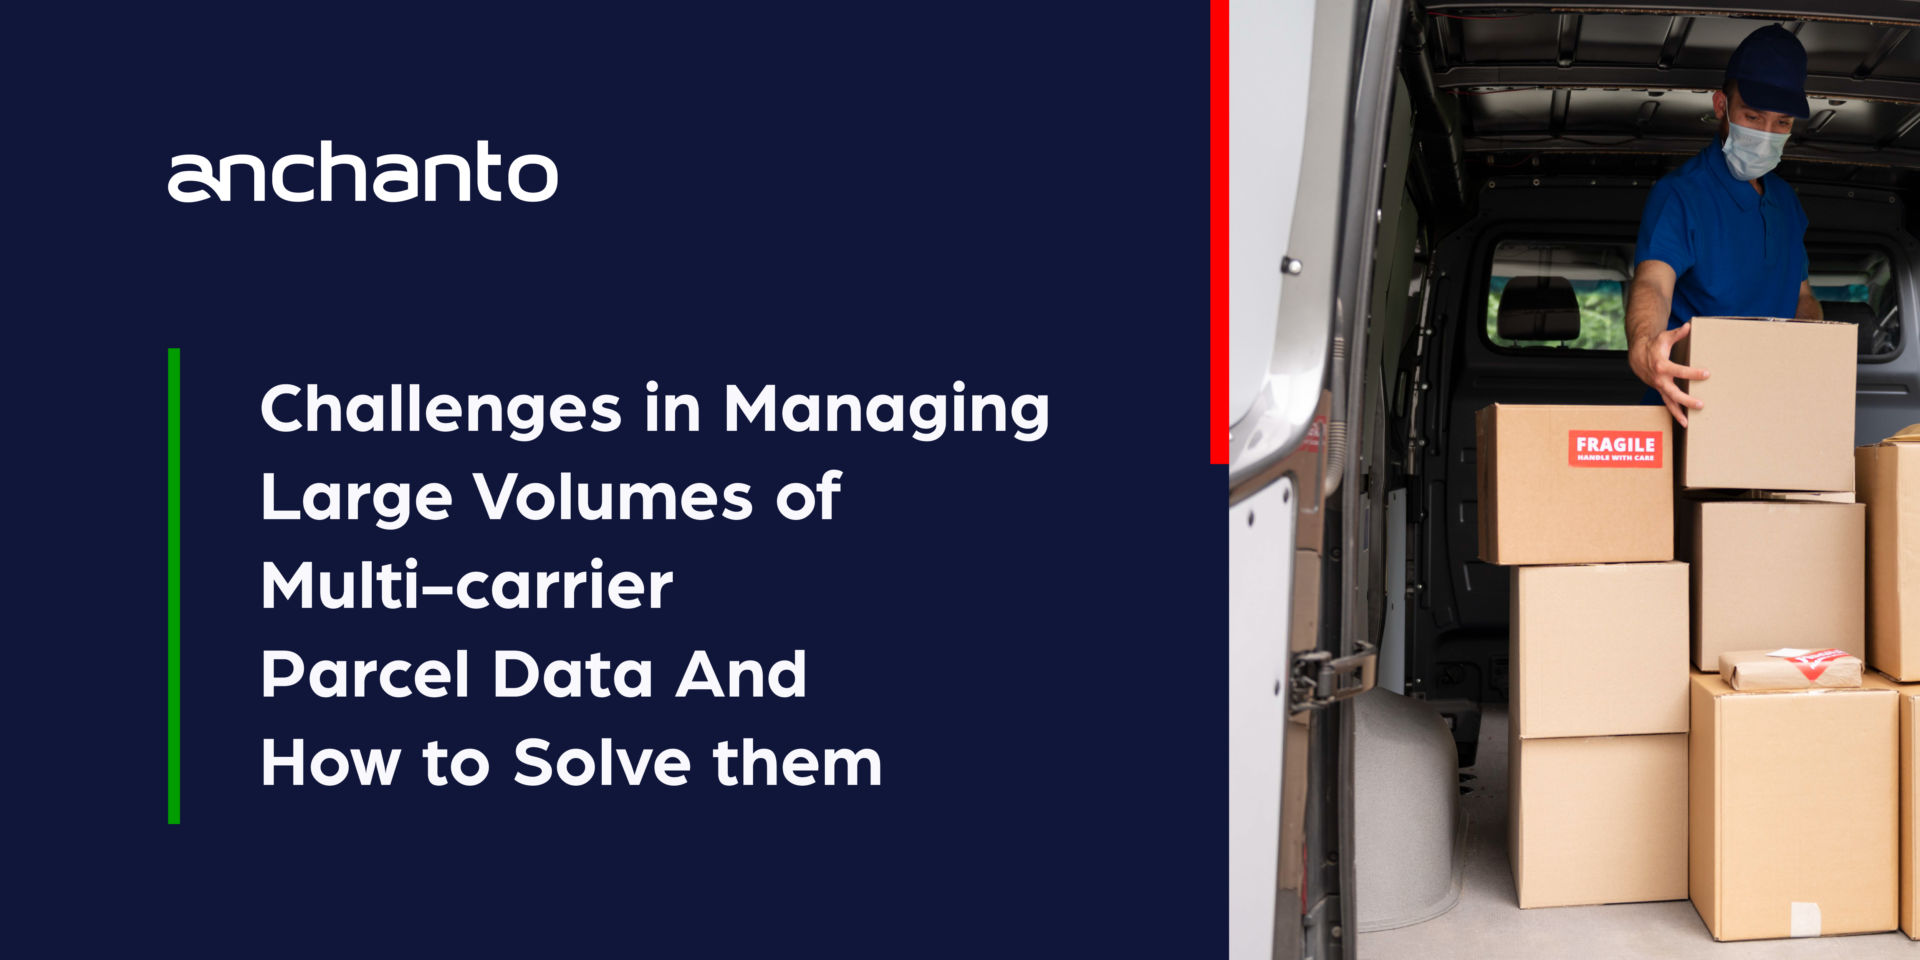 Challenges in Managing Large Volumes of Multi-carrier Parcel Data and How to Solve them